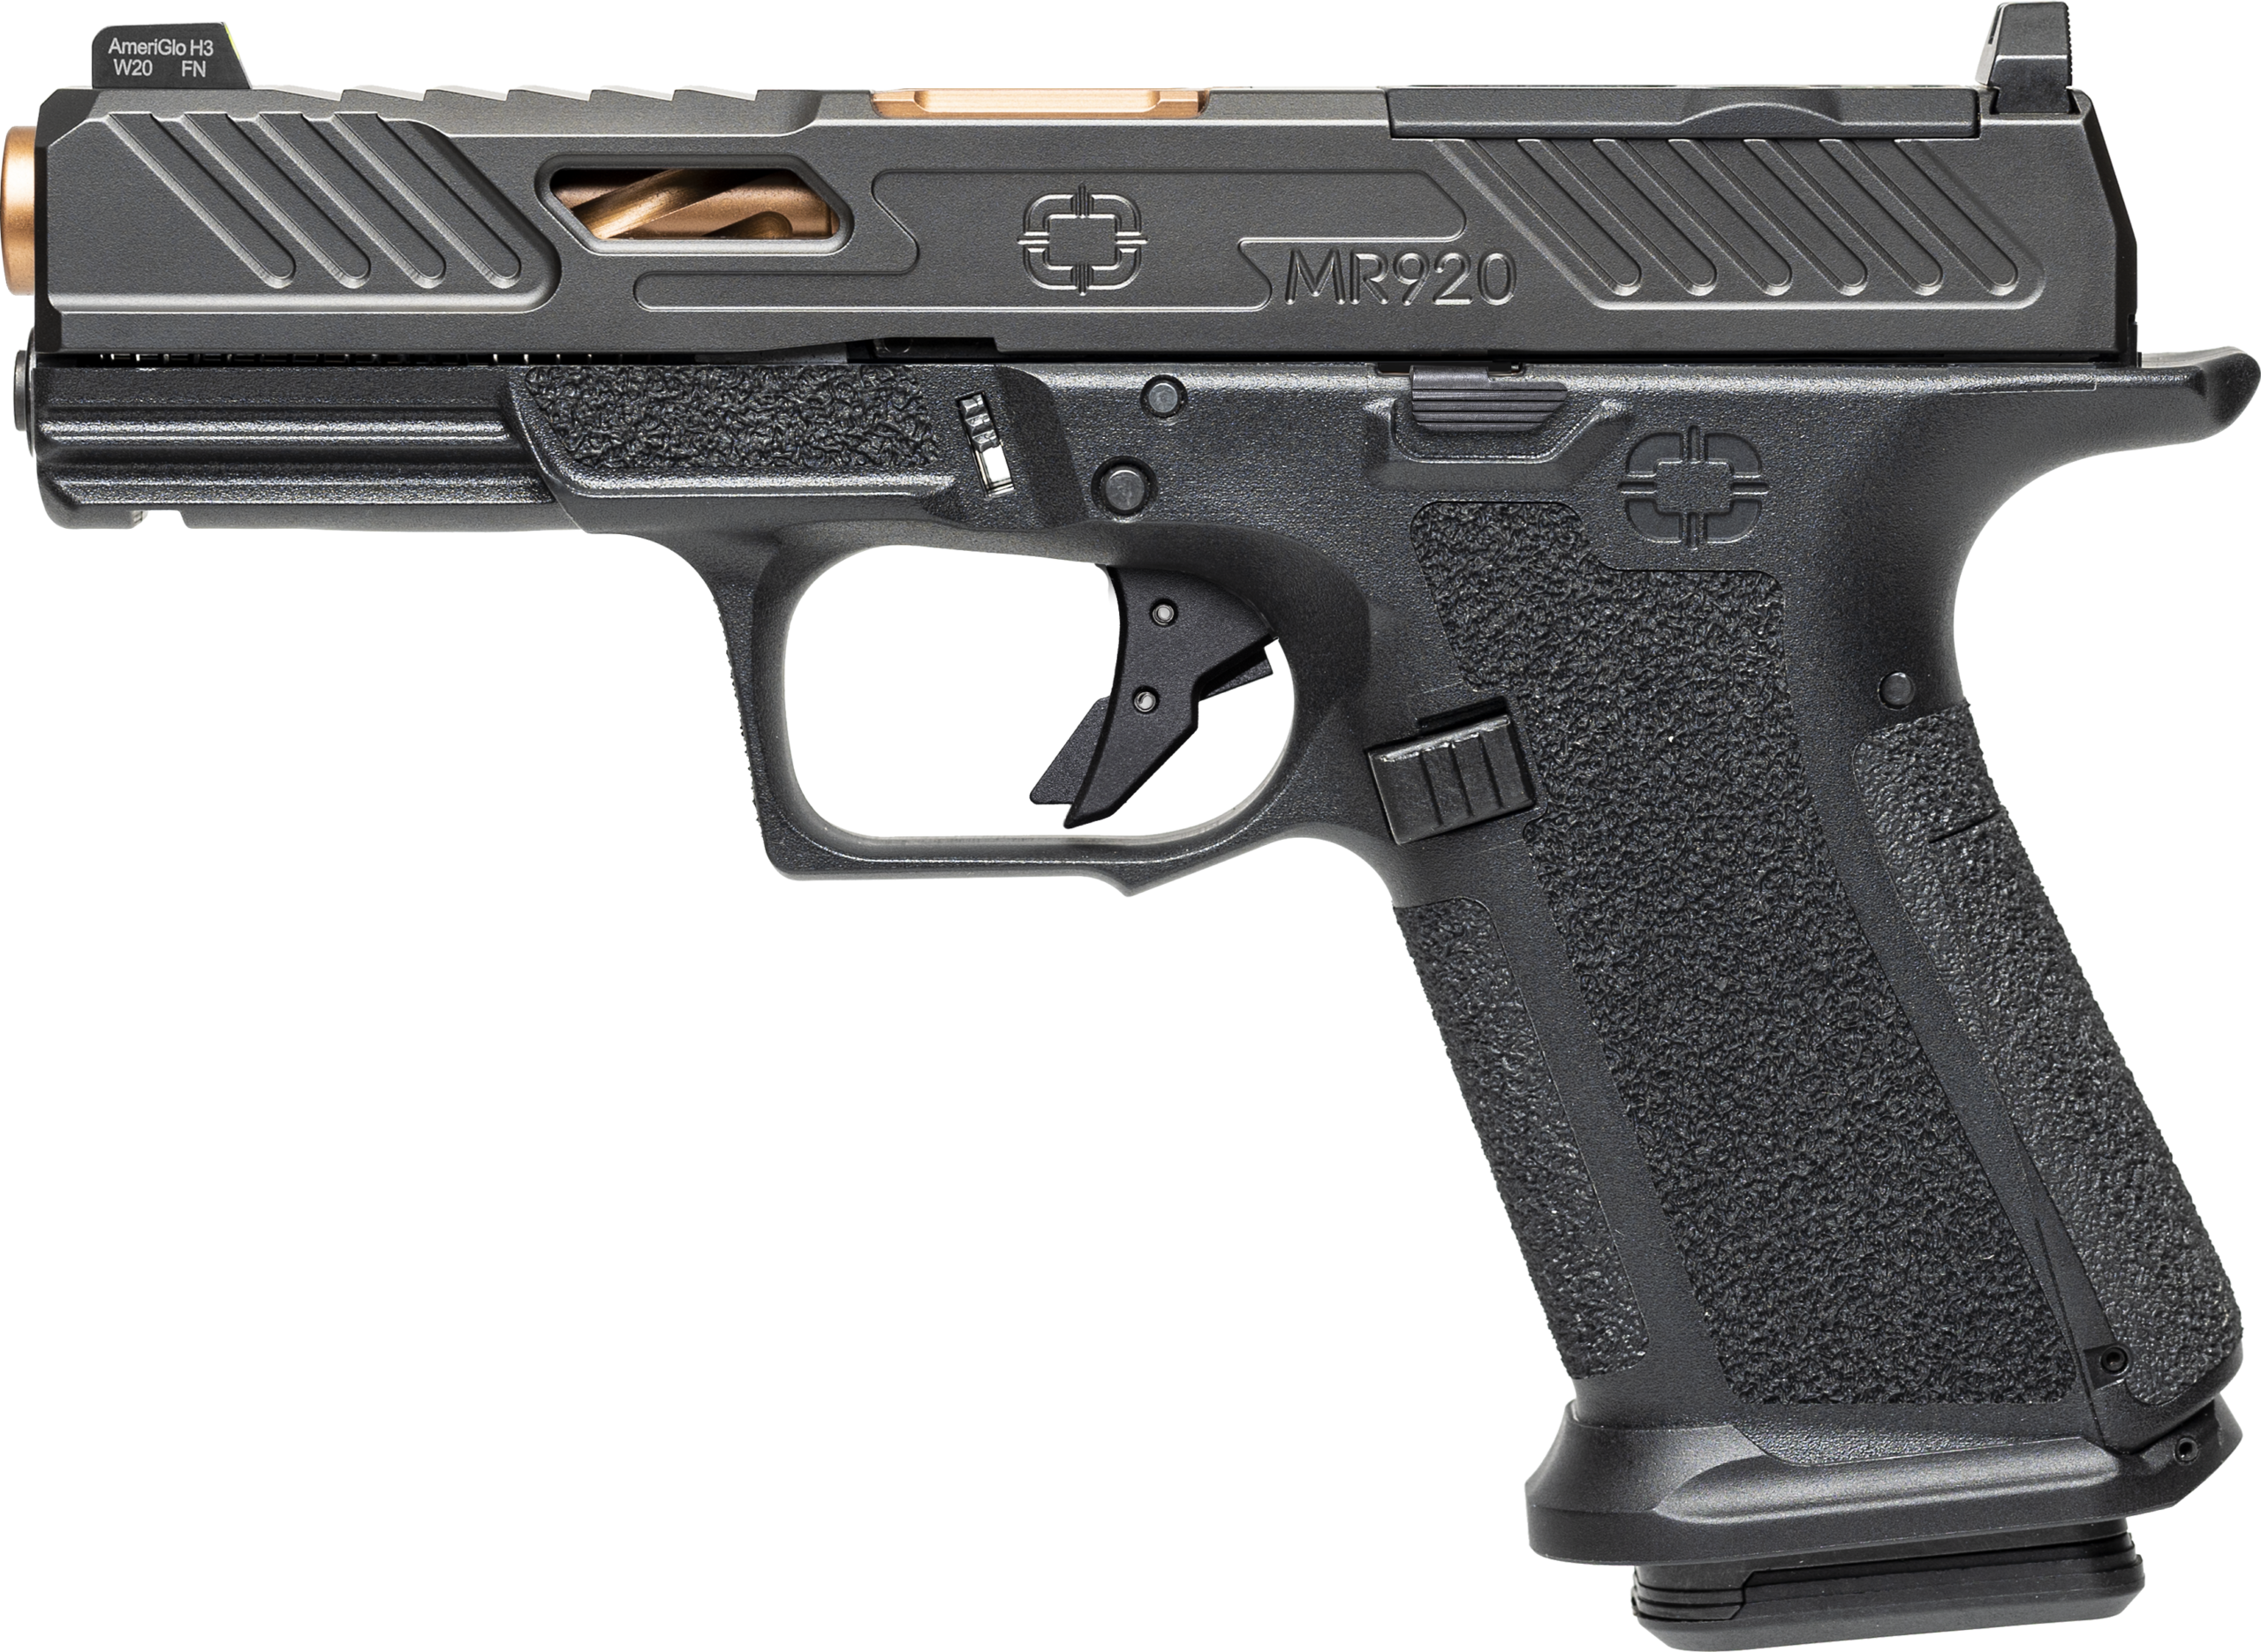 https://cityarsenal.com/product/shadow-systems-mr920-combat-9mm-pistol-optic-ready-with-night-sights-ss-1011/